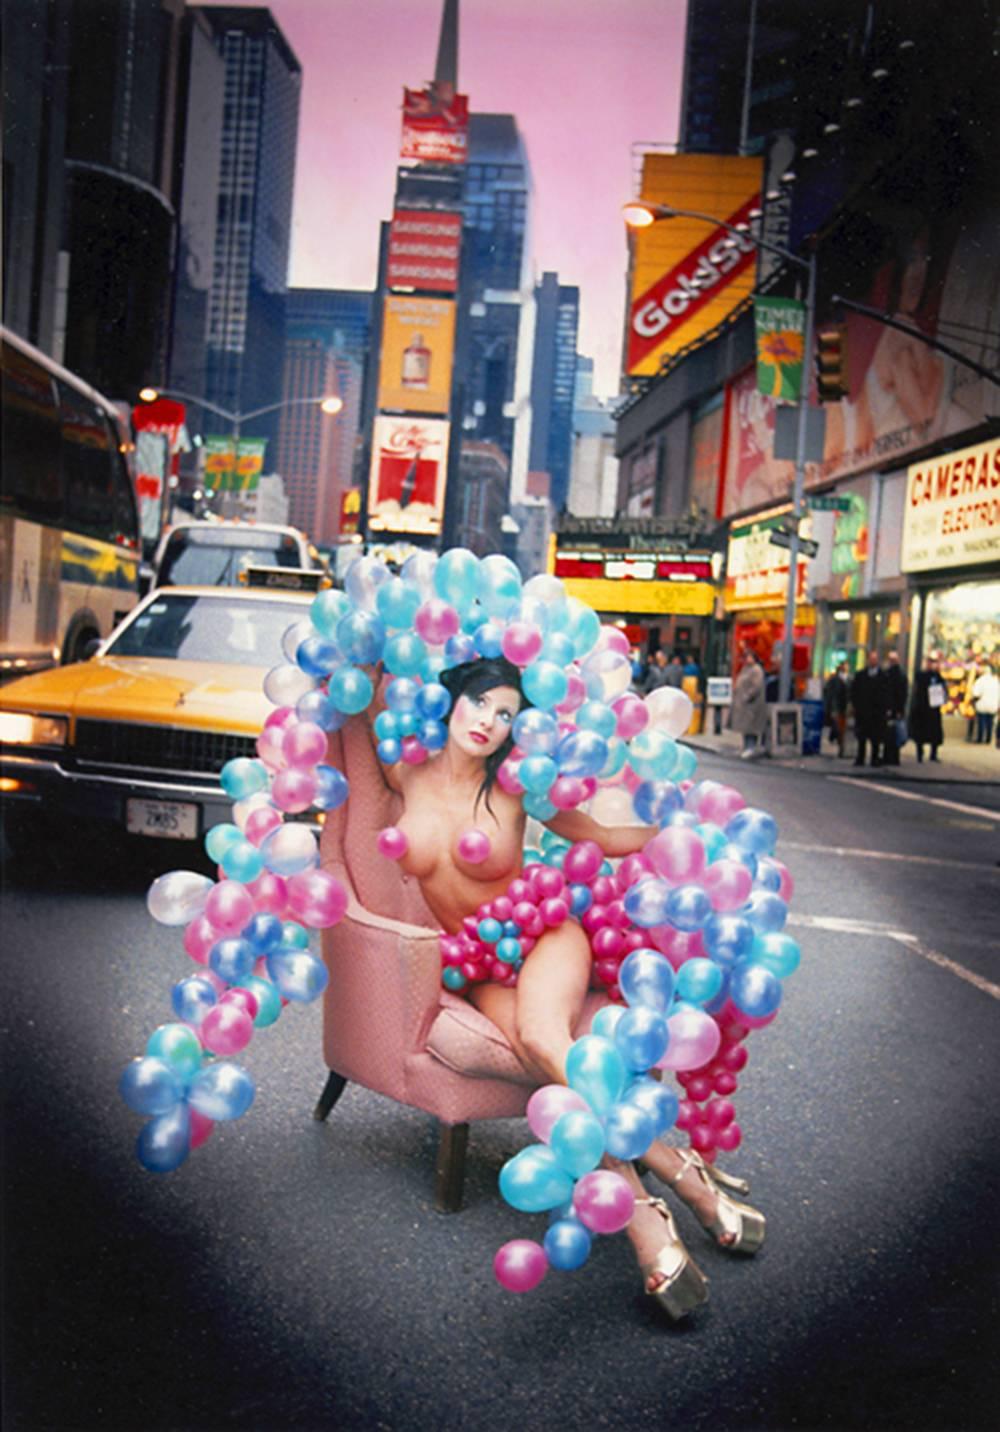 Porn Star in Times Square, New York, 1993 - Photograph by David LaChapelle